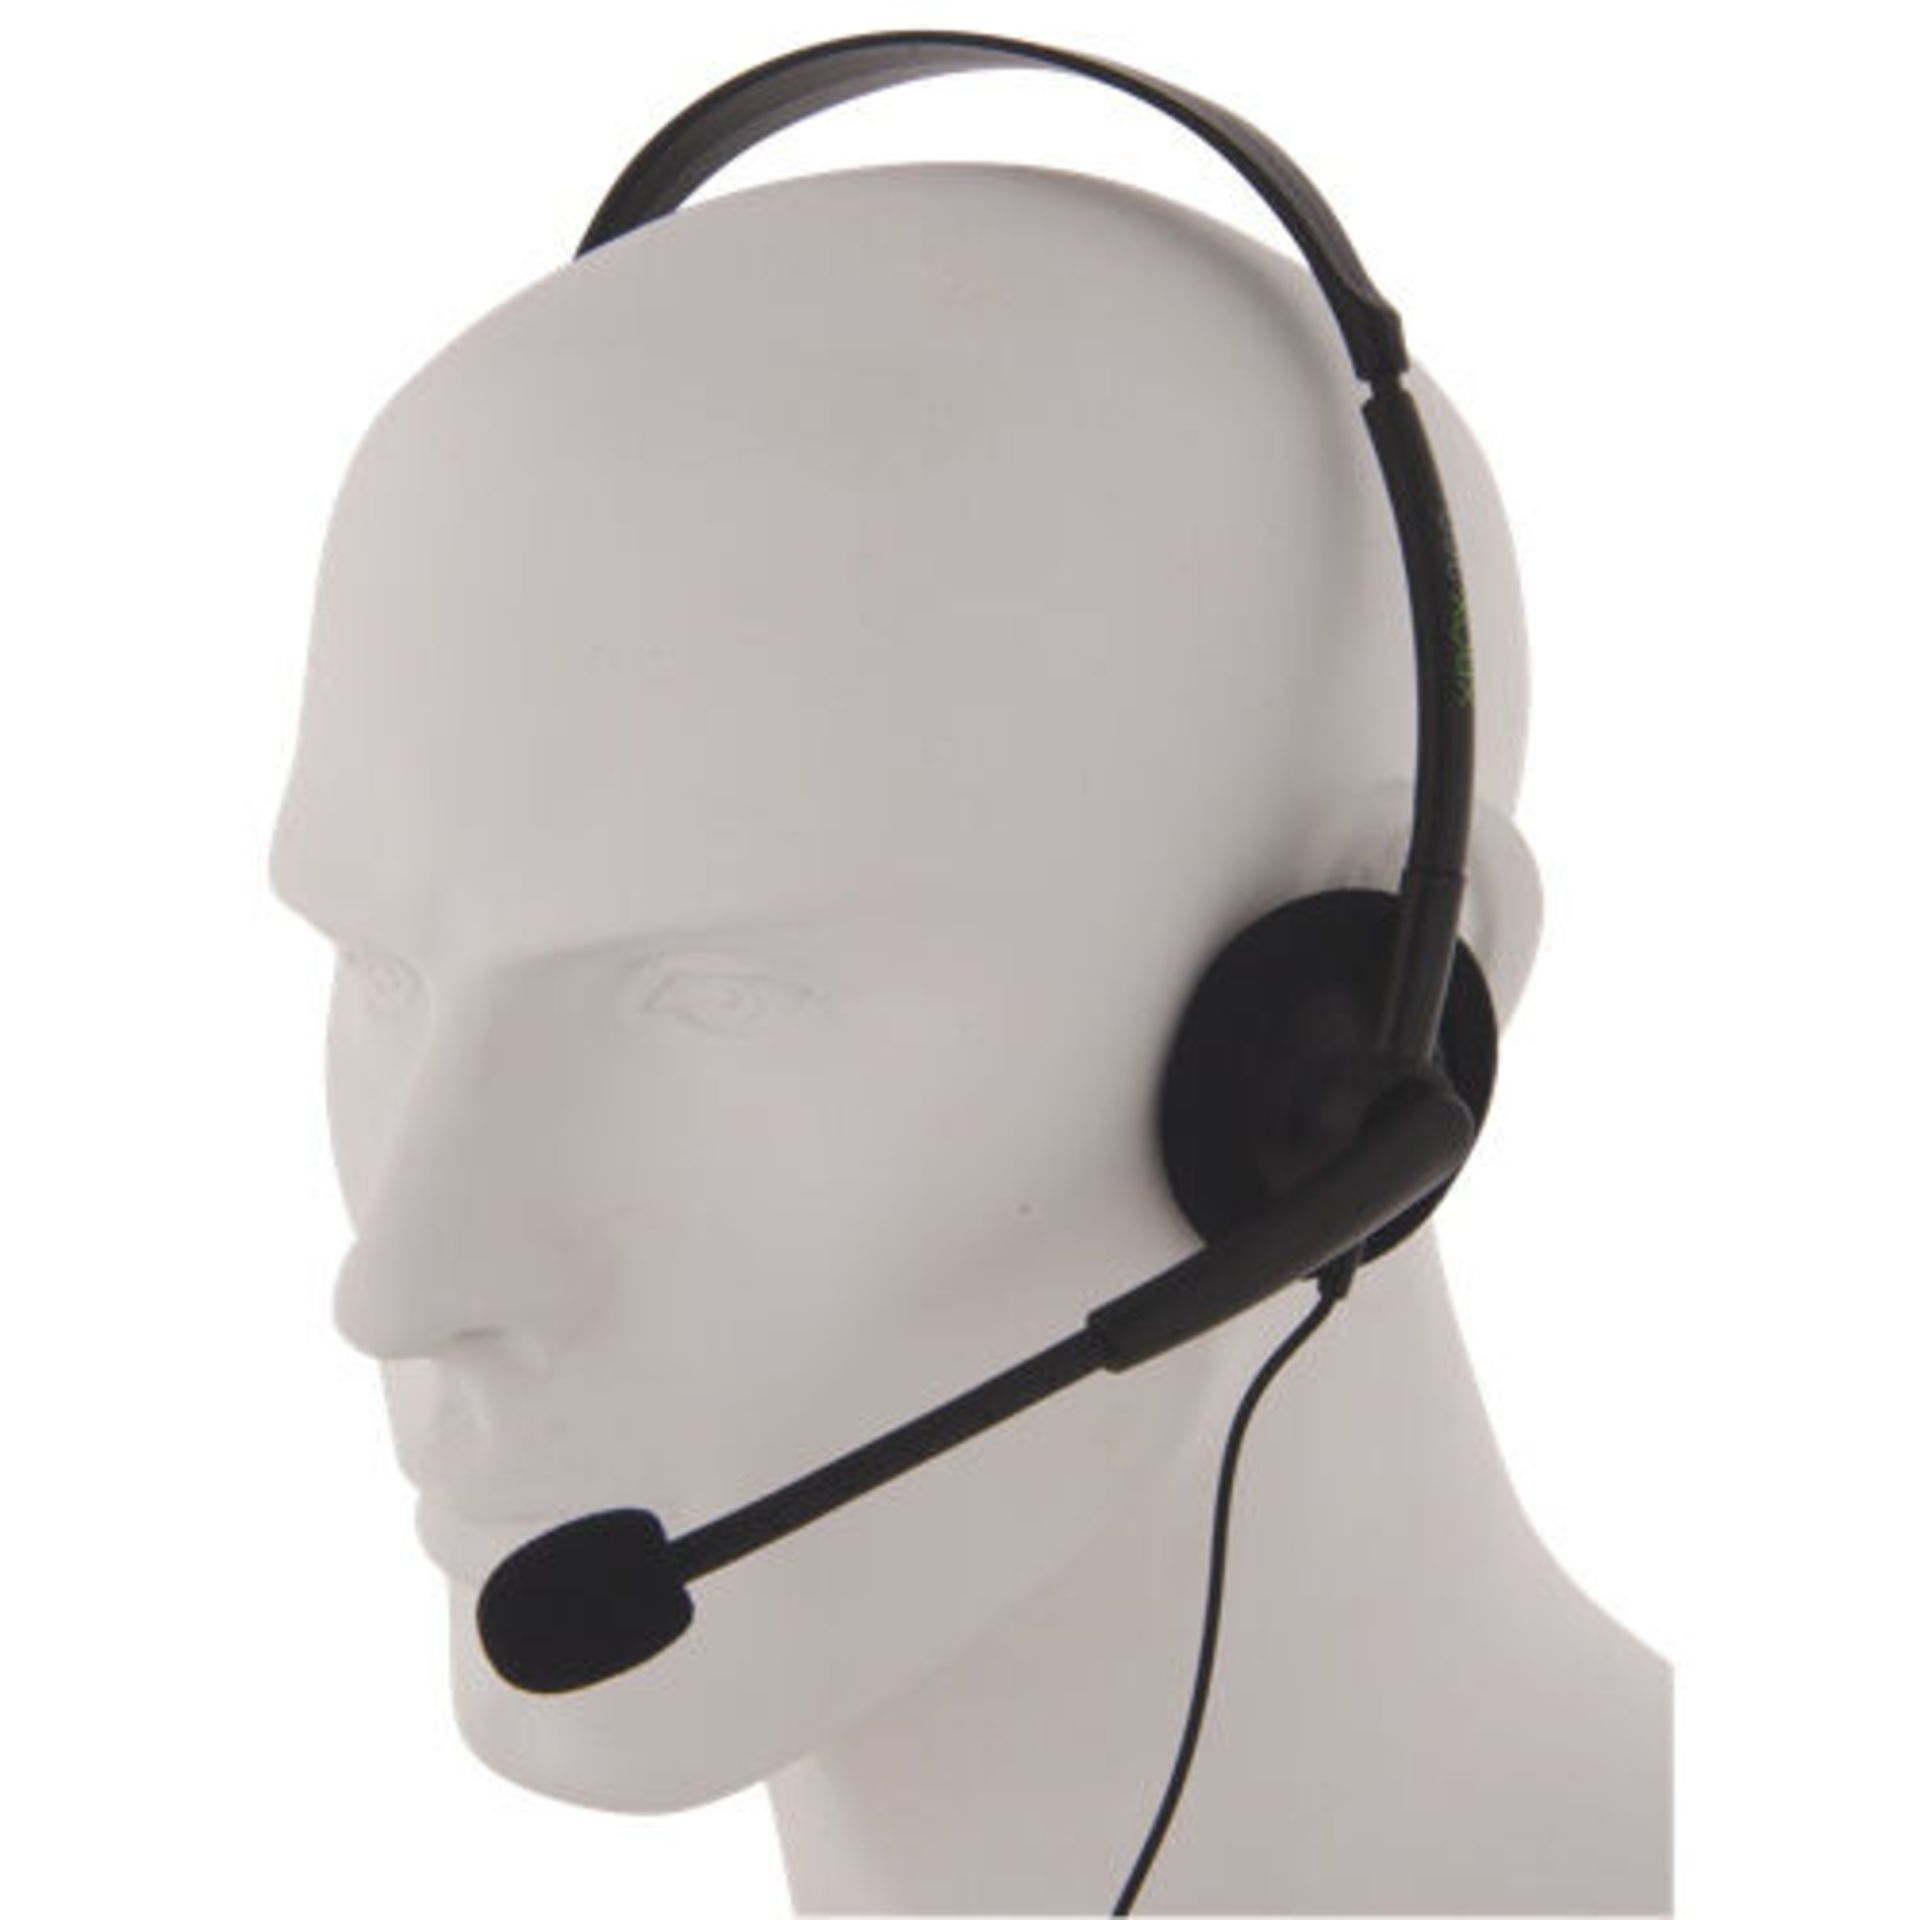 JOBLOT 500 X NEW OFFICIAL XBOX 360 LIVE ONLINE CHAT HEADSET WITH MIC GAMING HEADPHONES 2.5MM AUX - Image 3 of 6